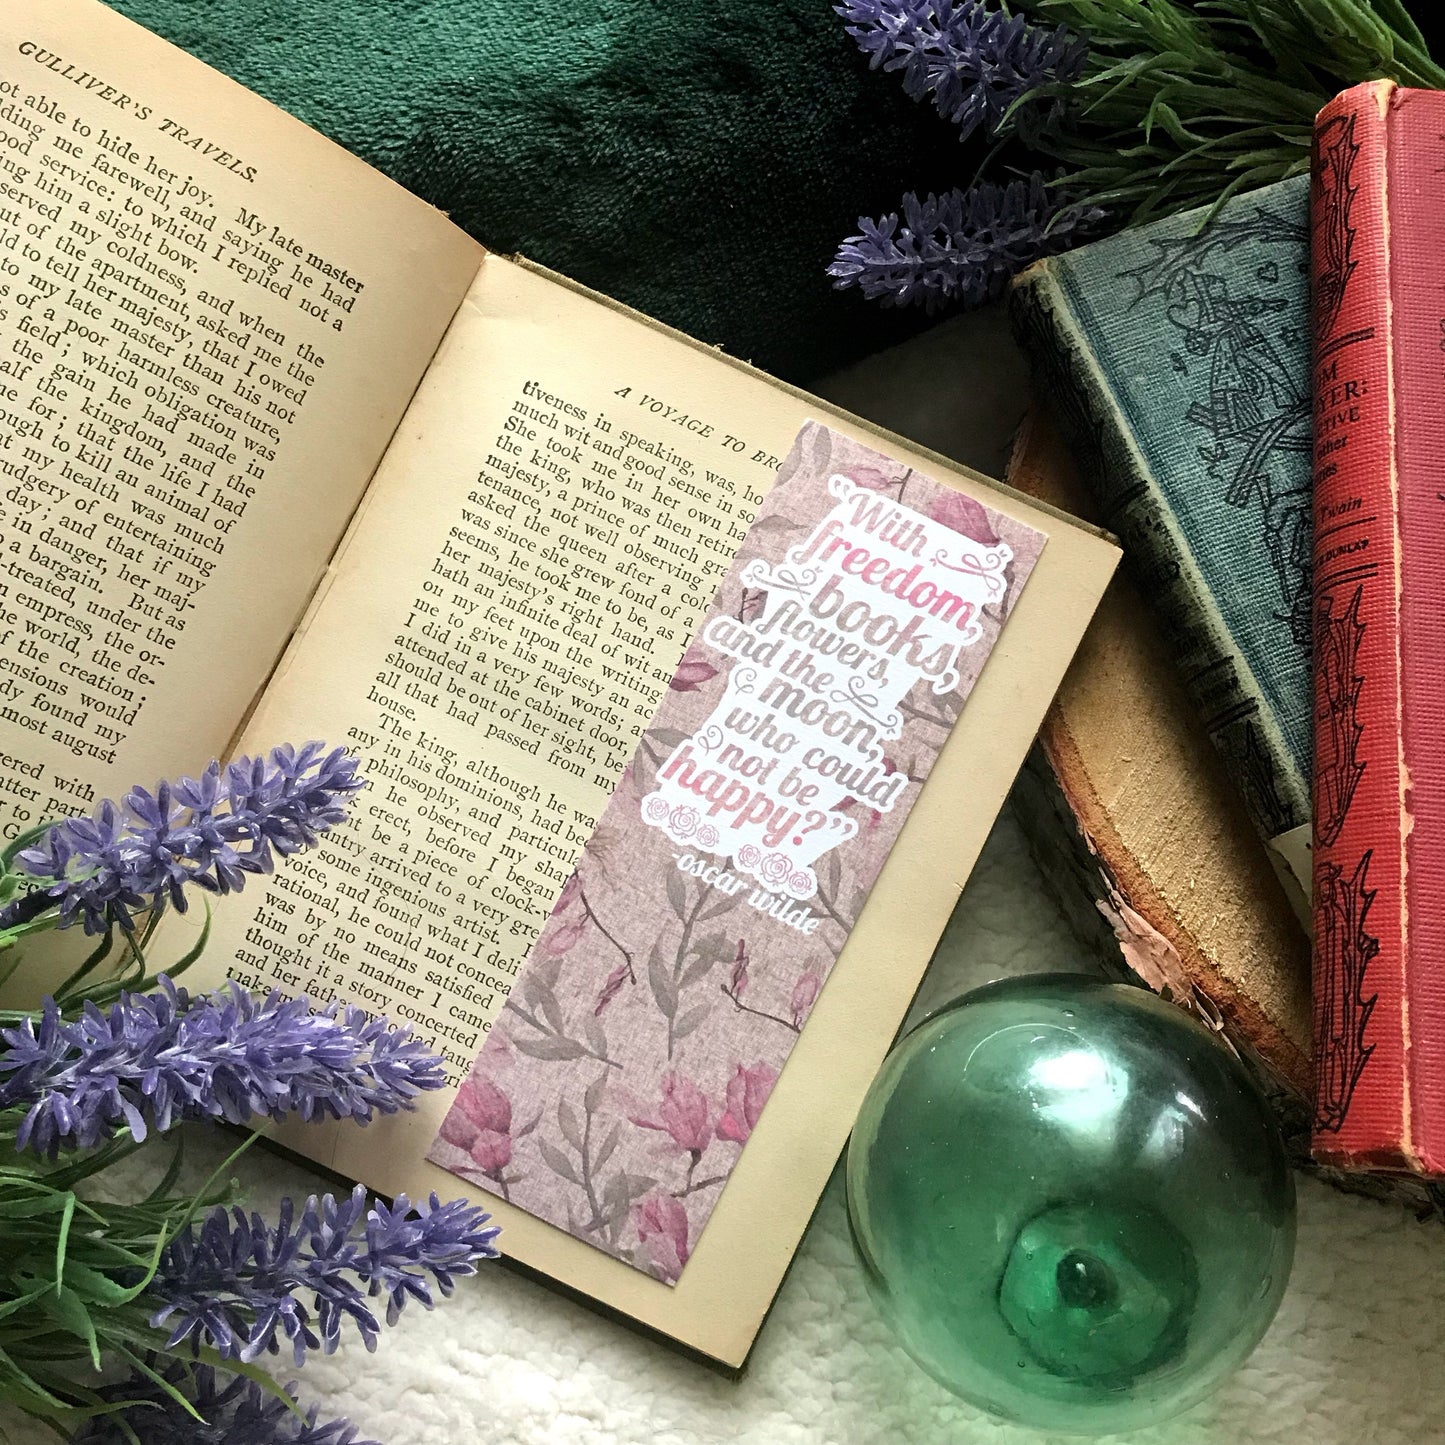 "With Freedom, Books, Flowers, and the Moon Who Could Not Be Happy?" Oscar Wilde Quote Bookmark